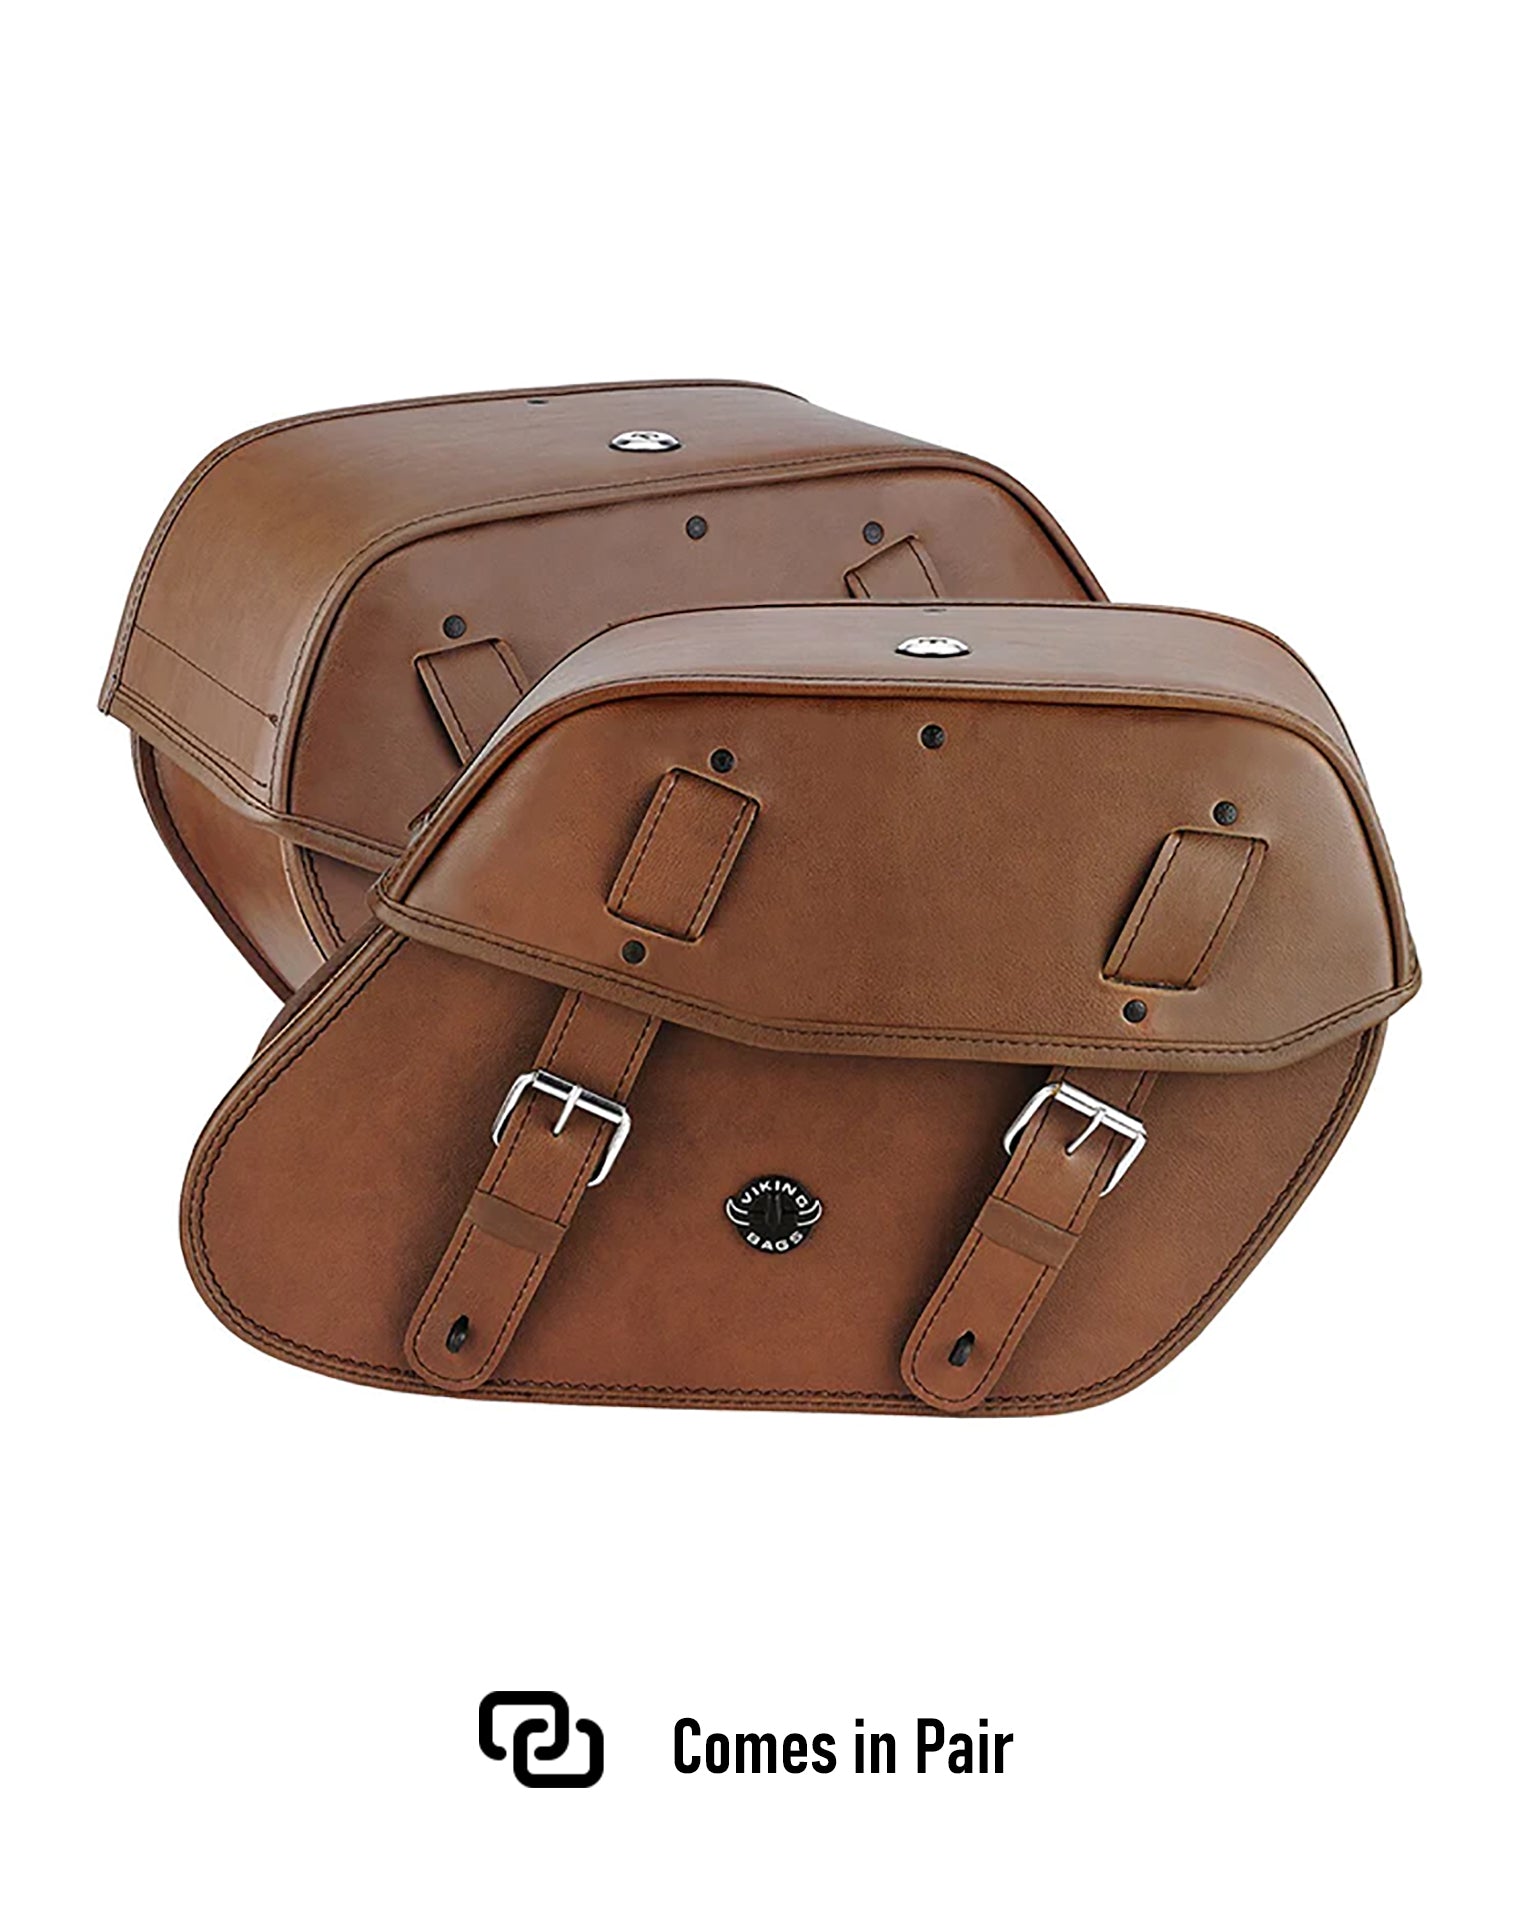 Viking Odin Brown Large Leather Motorcycle Saddlebags For Harley Softail Low Rider Fxlr Weather Resistant Bags Comes in Pair